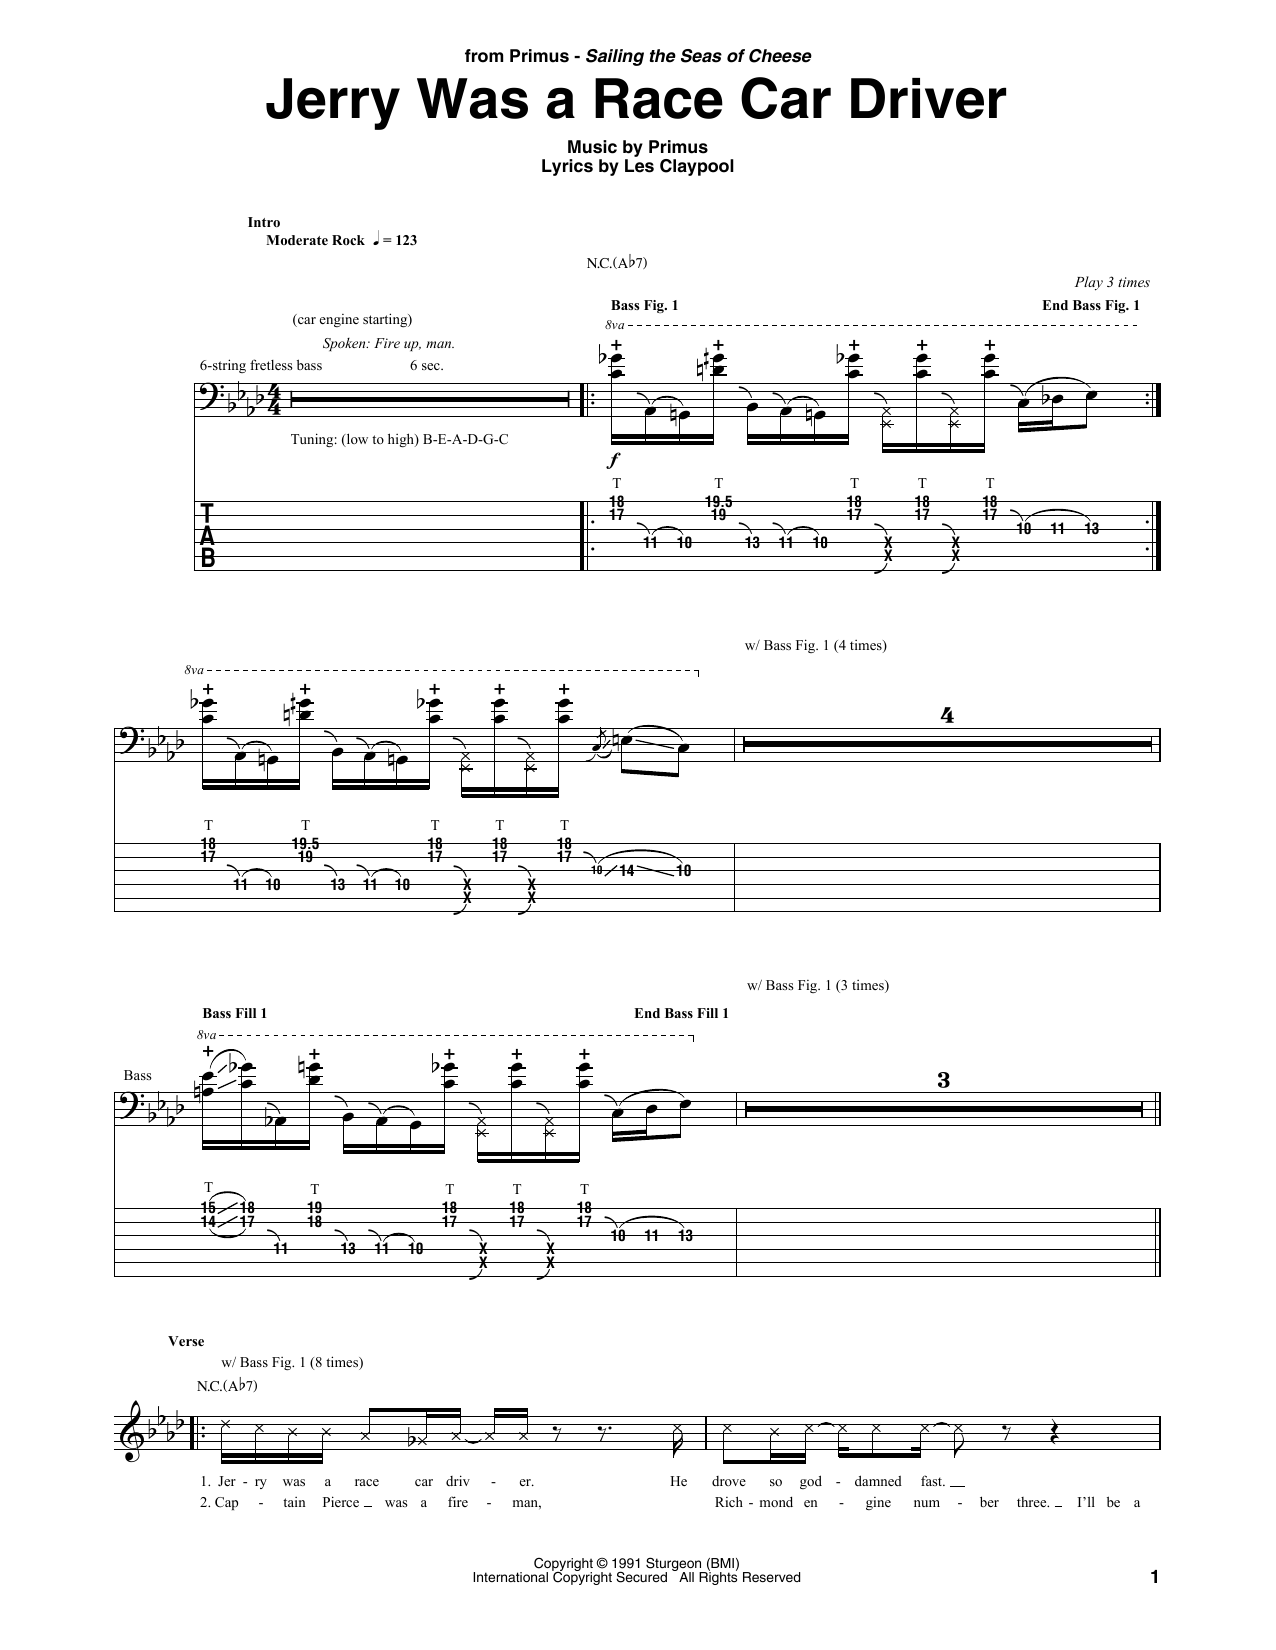 Download Primus Jerry Was A Race Car Driver Sheet Music